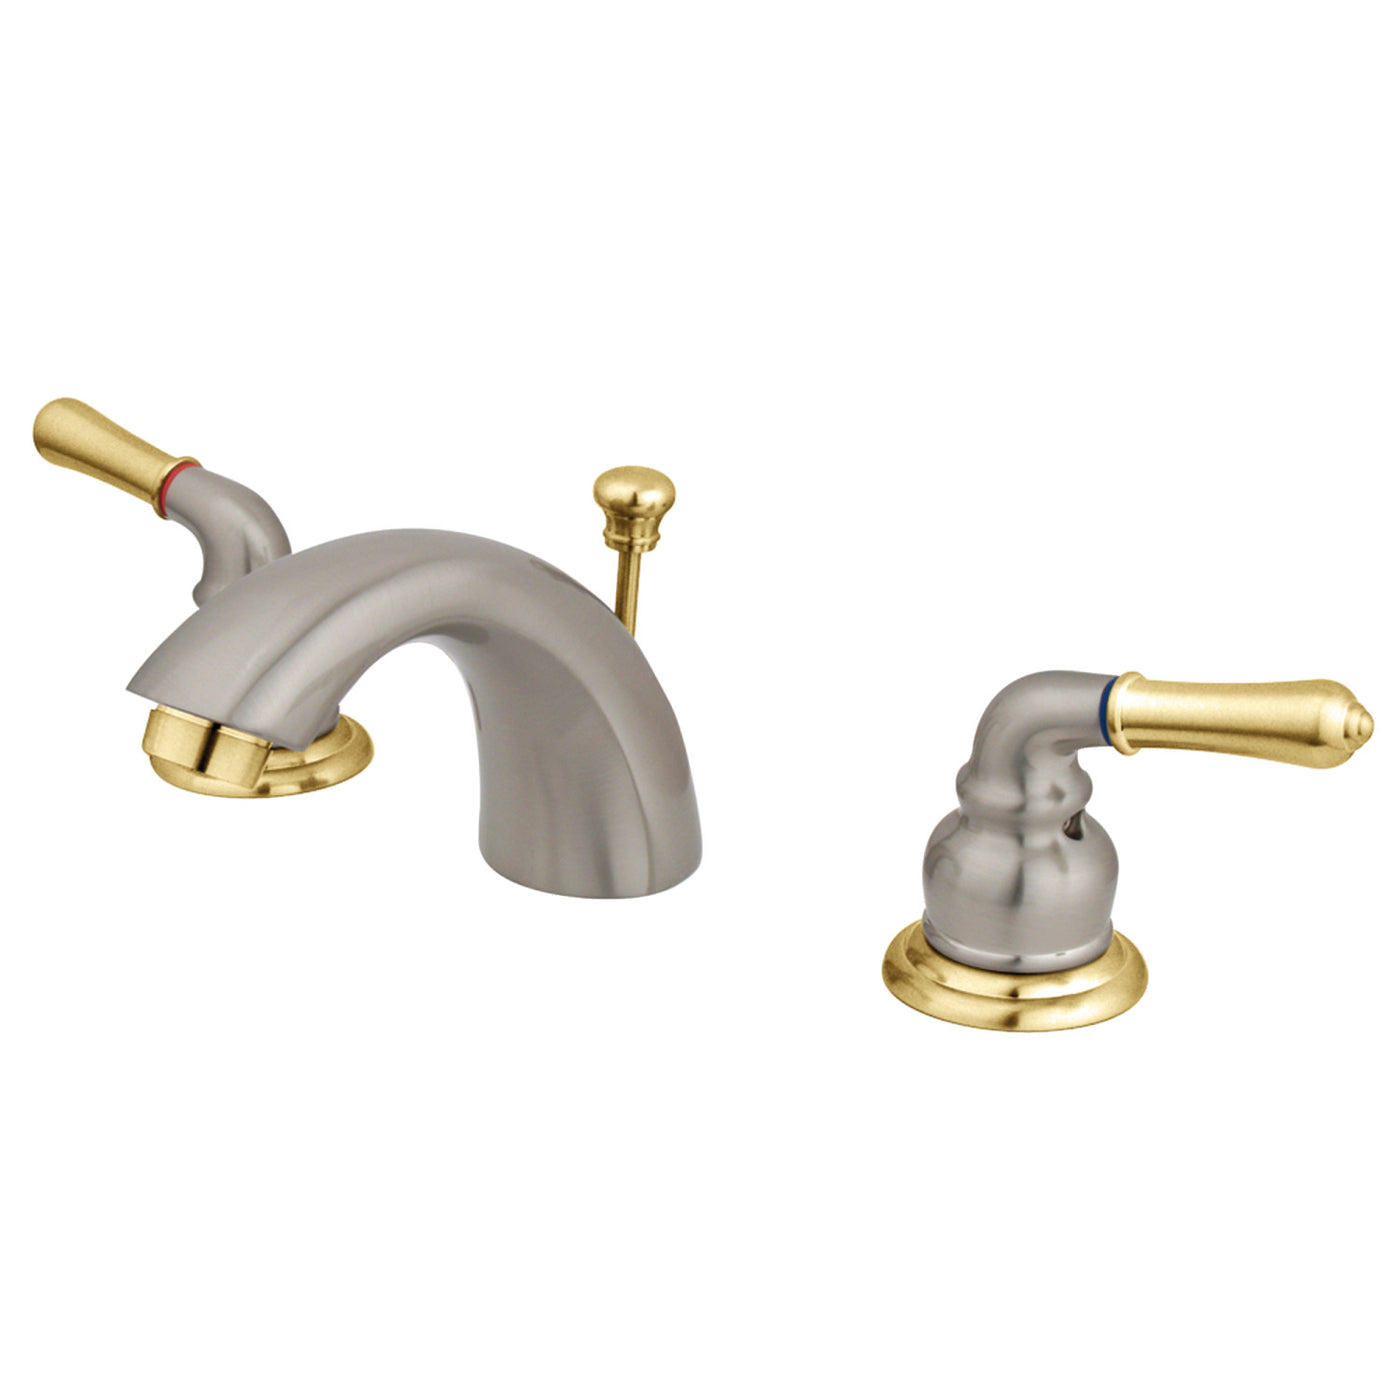 Elements of Design EB959 Mini-Widespread Bathroom Faucet, Brushed Nickel/Polished Brass